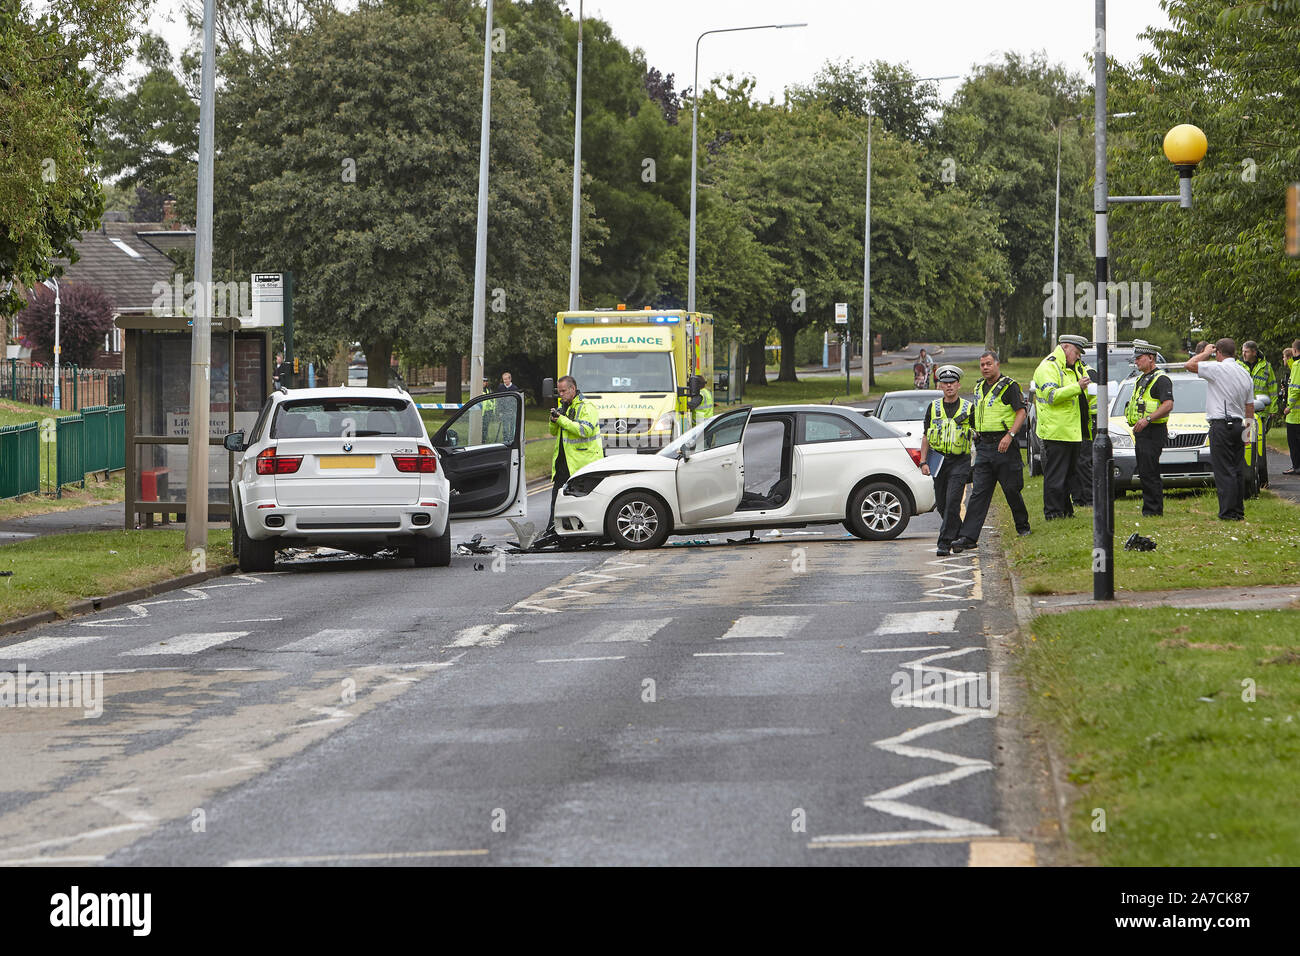 28th July 2016 - Emergency services attend a serious road traffic accident, RTA, following an head on car crash in West Hul, East Yorkshire, UK. Stock Photo